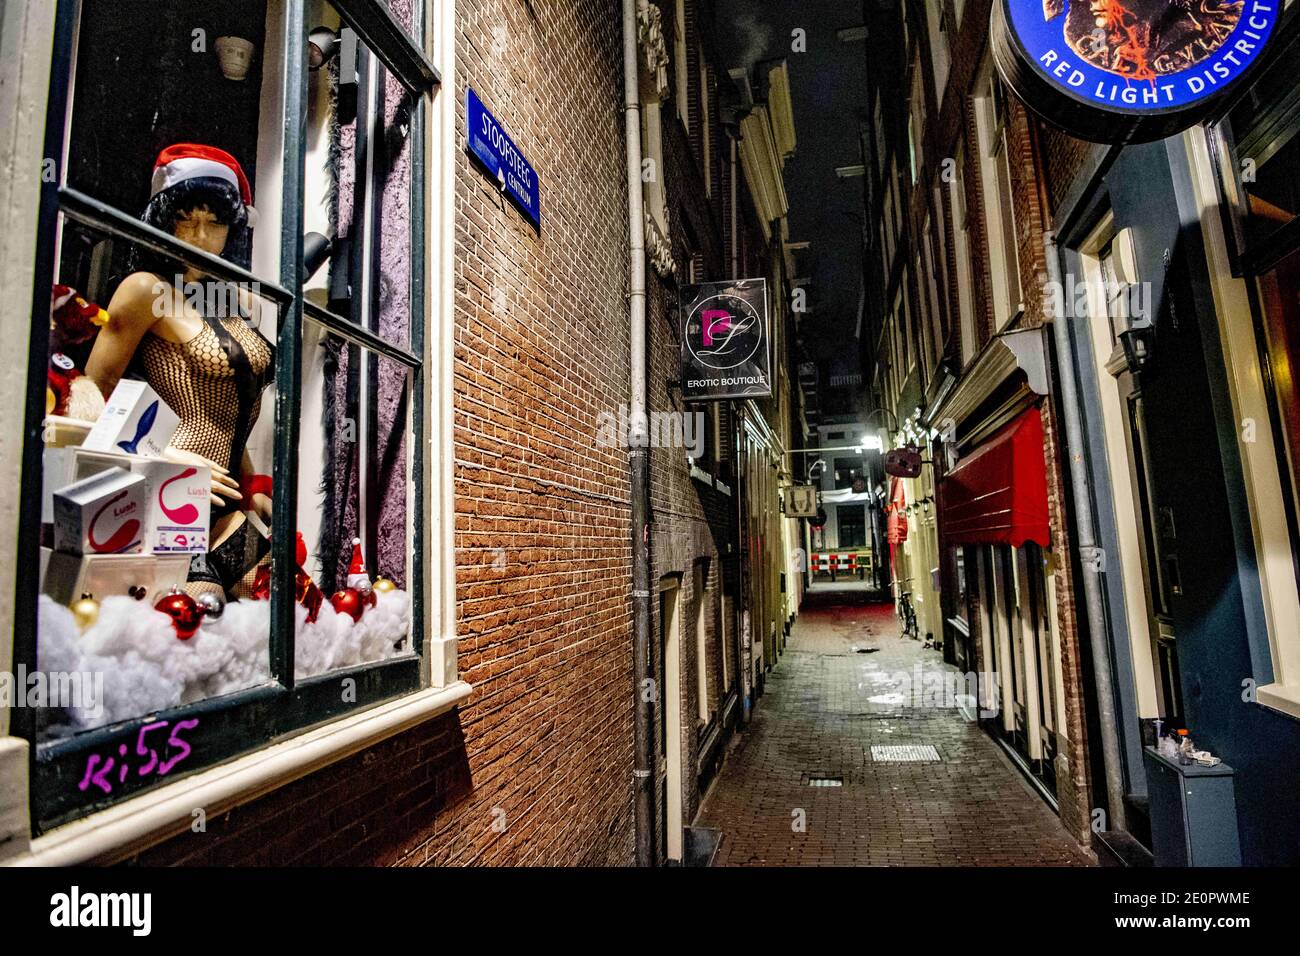 Amsterdam, Netherlands. 02nd Jan, 2021. Empty red light district in Amsterdam, the Netherlands, on January 01, during the Covid-19 lockdown. The streets are quiet due to the new corona rules and